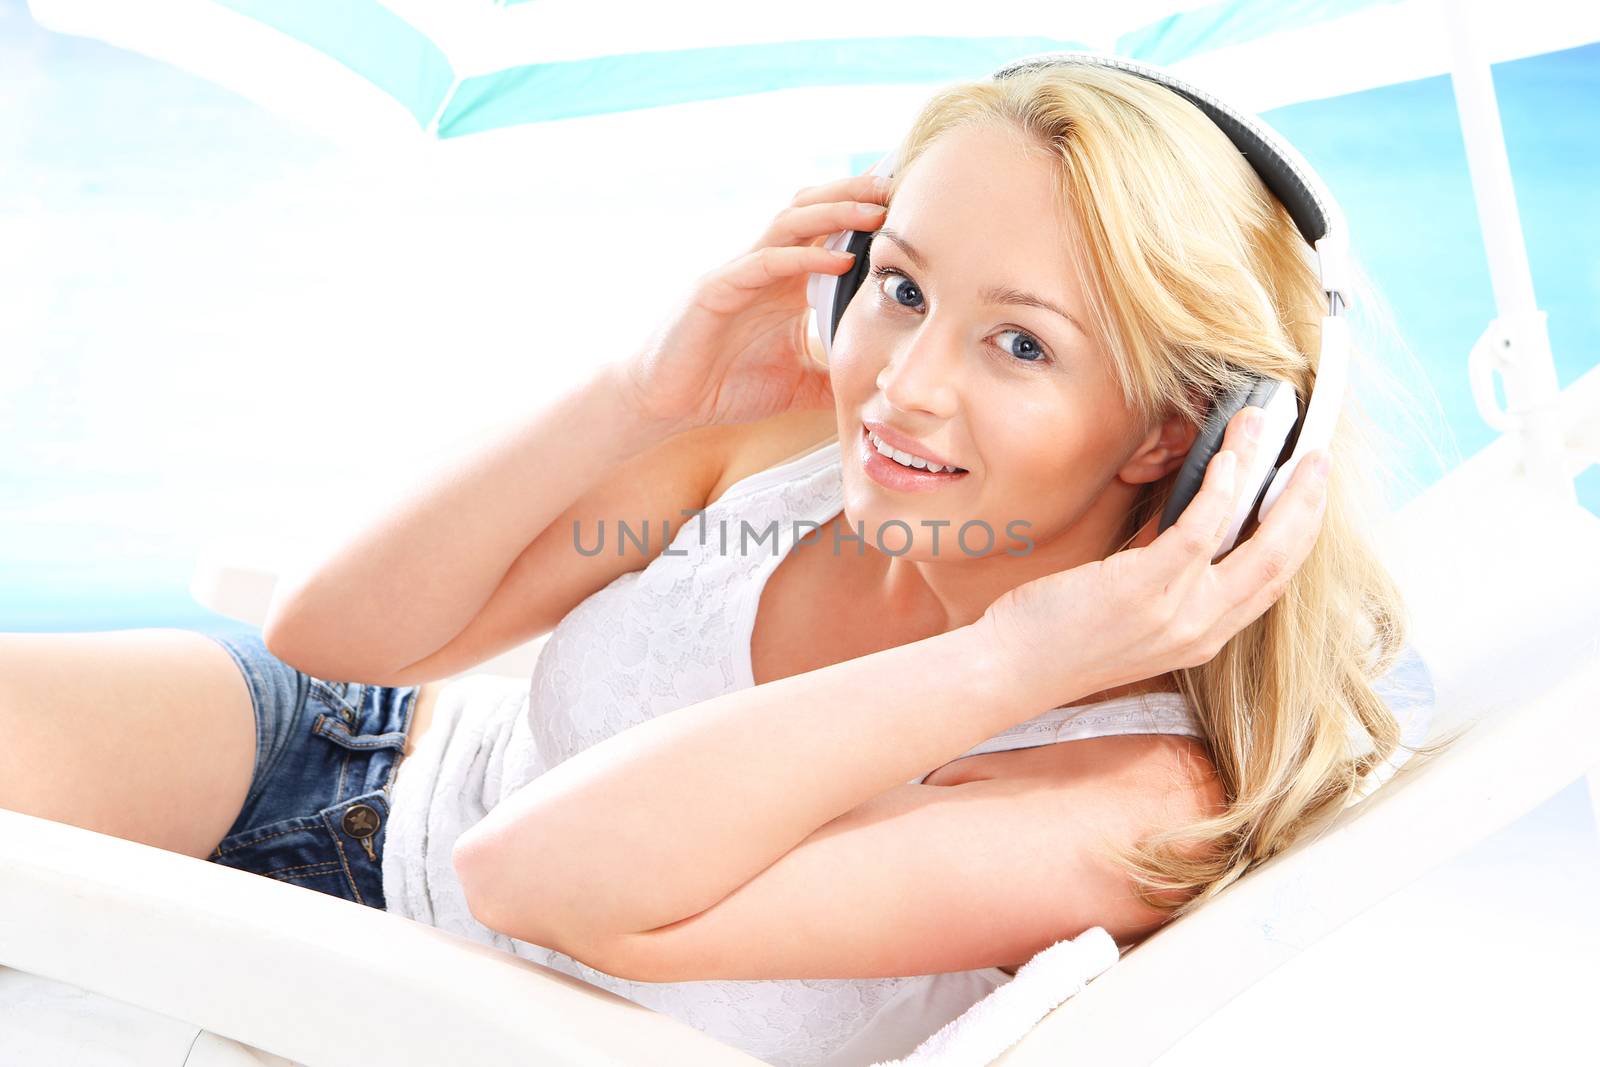 Young attractive woman relaxing on a deck chair relaxing listening to music on a background of blue ocean .